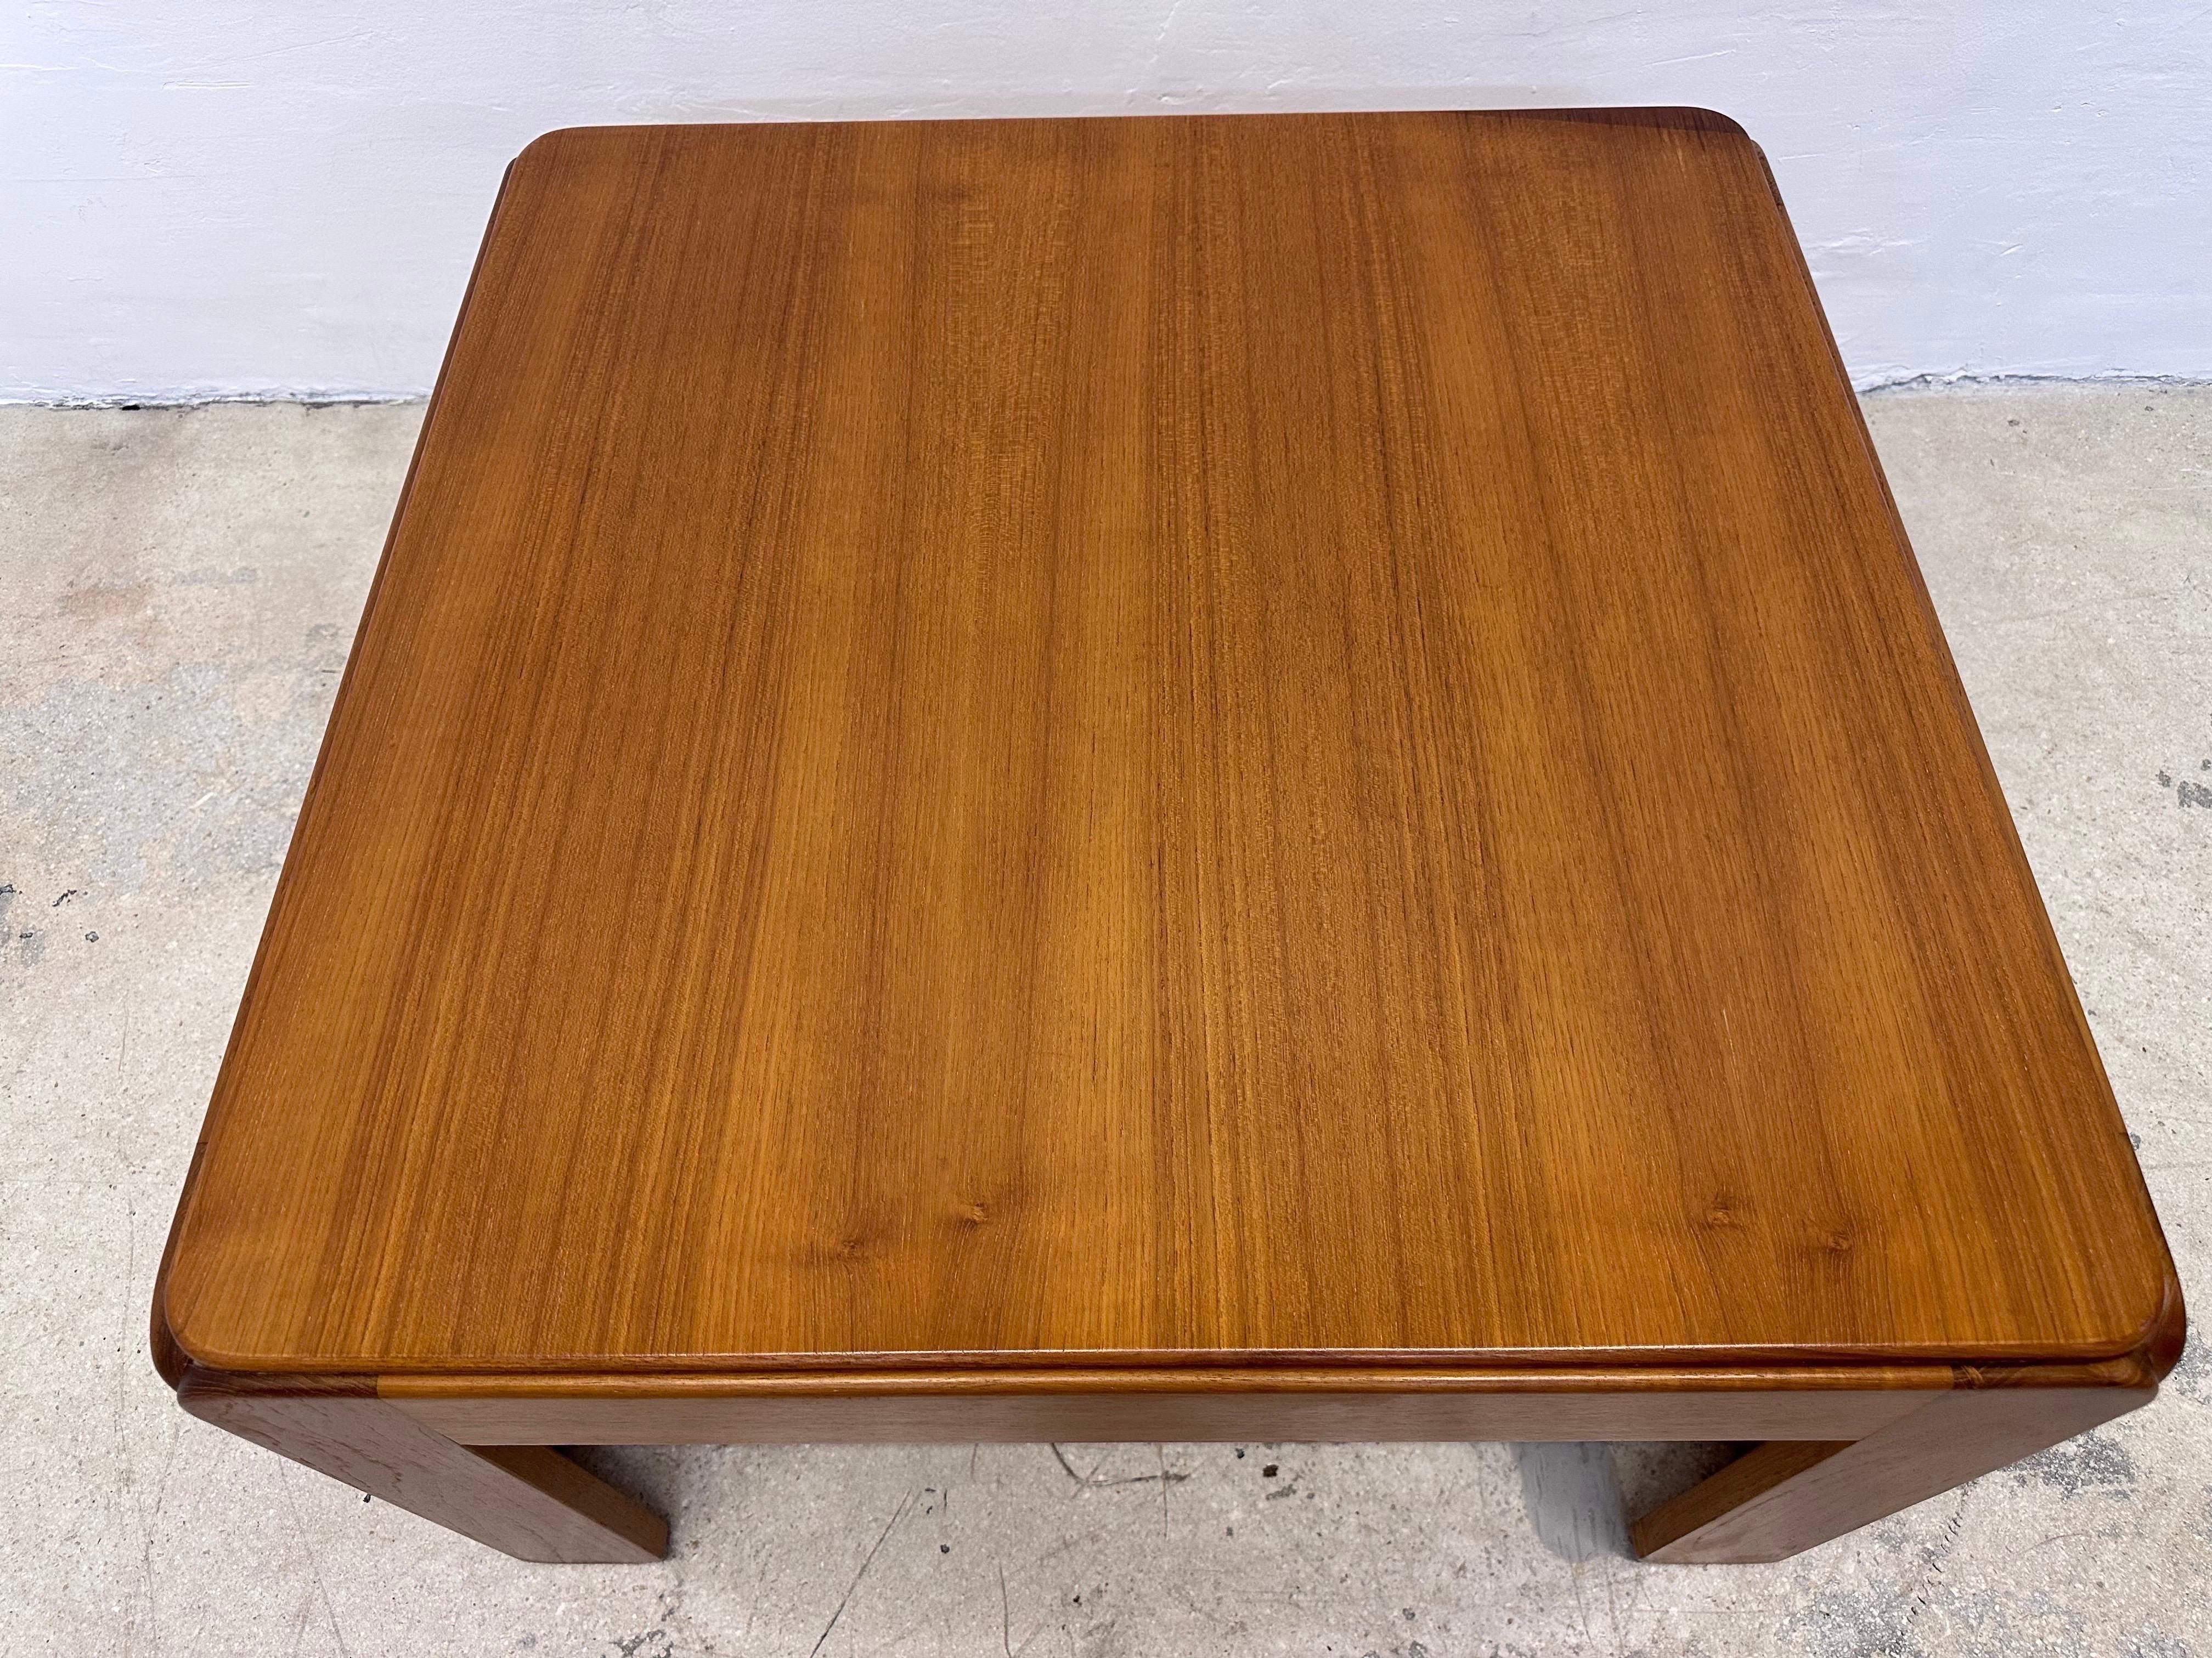 Illum Wikkelso Danish Modern Wood Coffee or Side Table for Niels Eilersen, 1960s For Sale 2